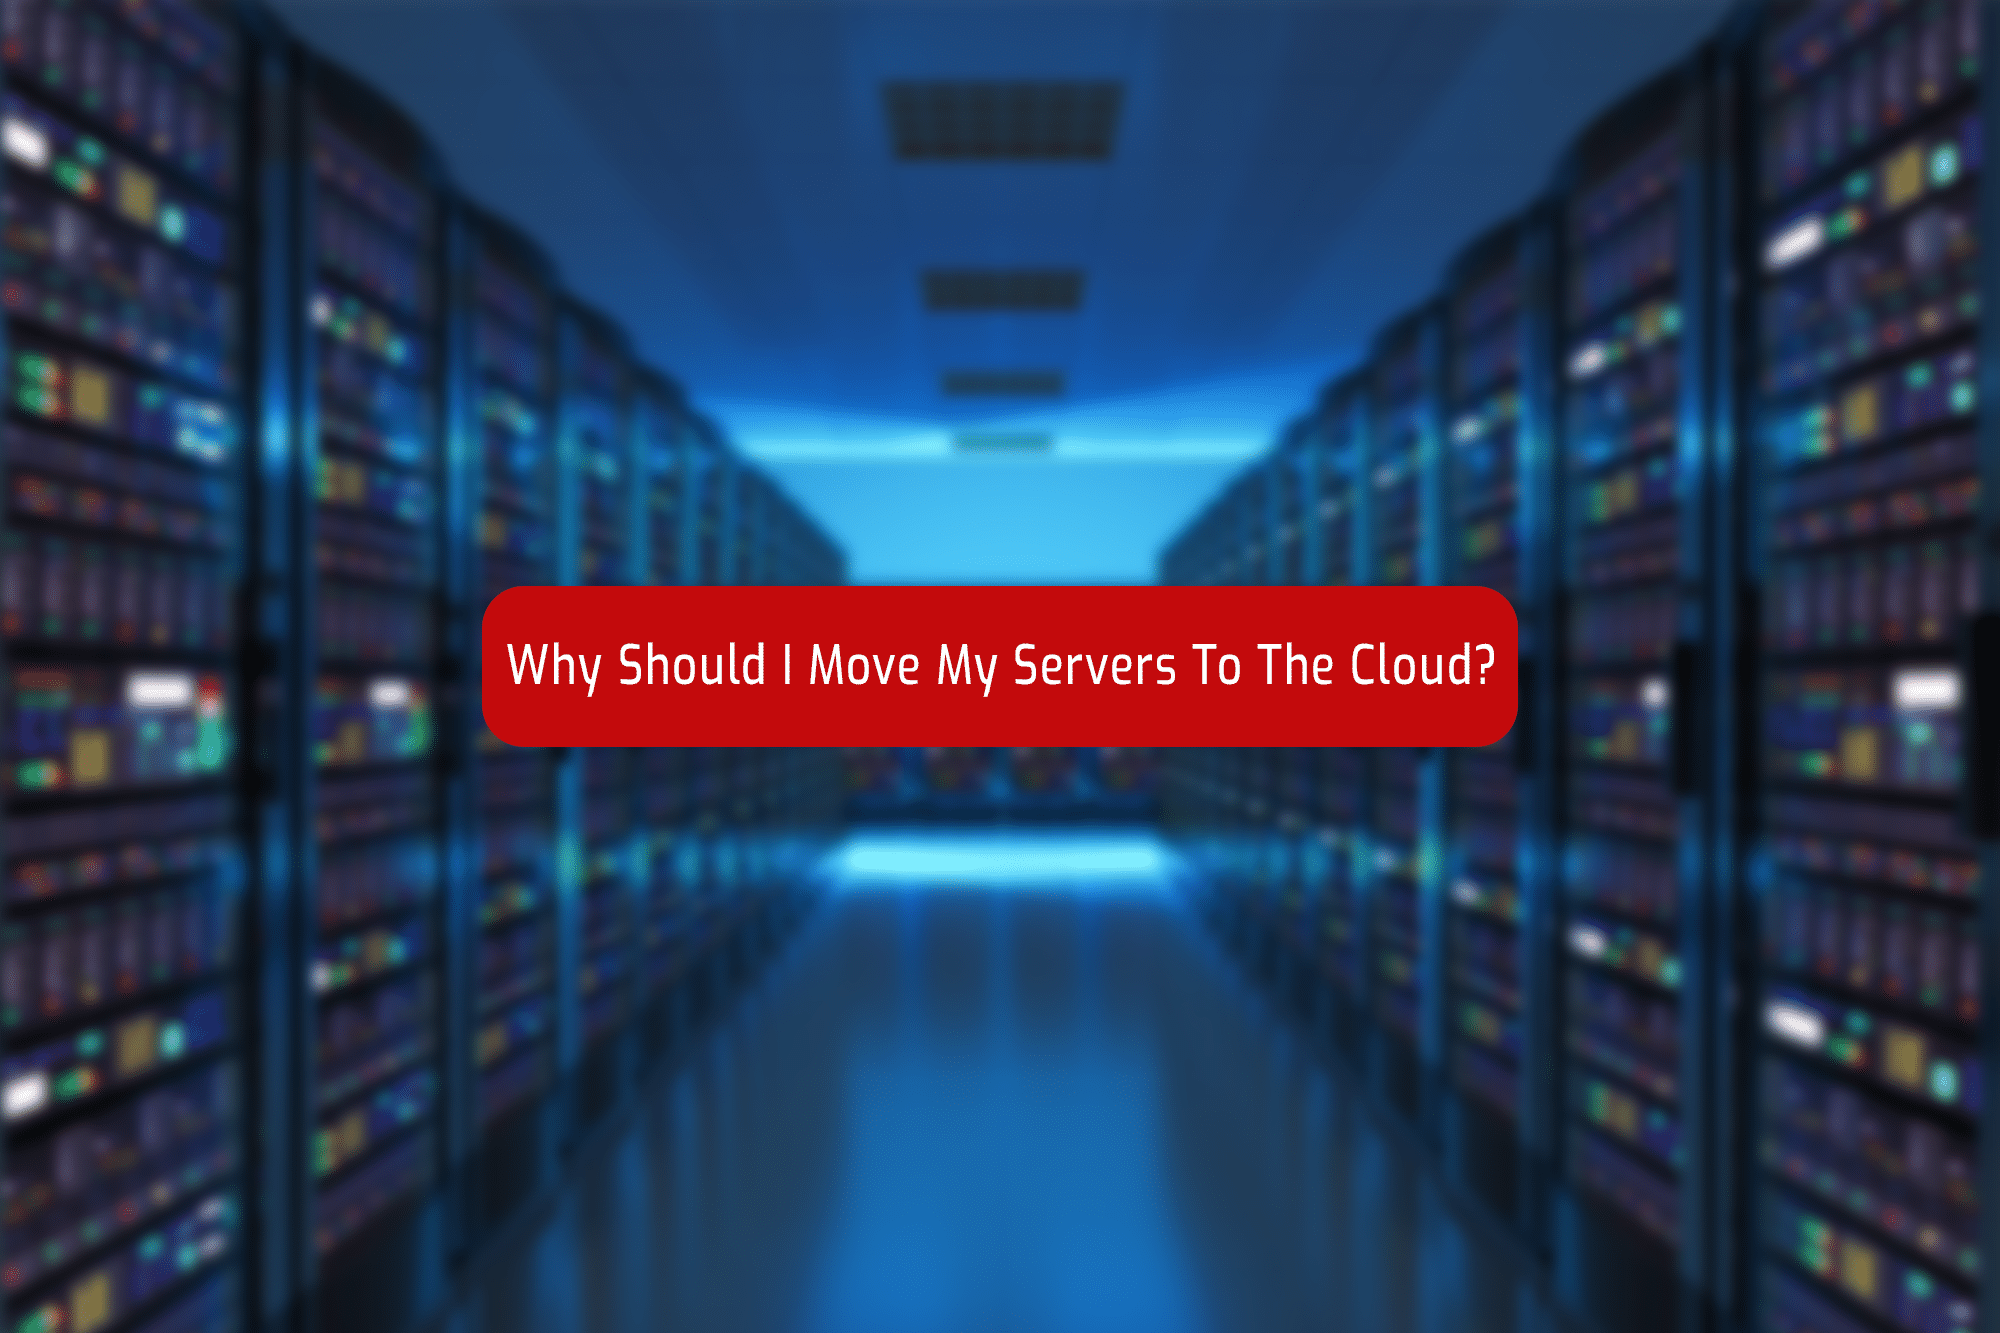 A server room, blurred, with the caption "Why should I move my servers to the cloud?" in a red box with rounded corners